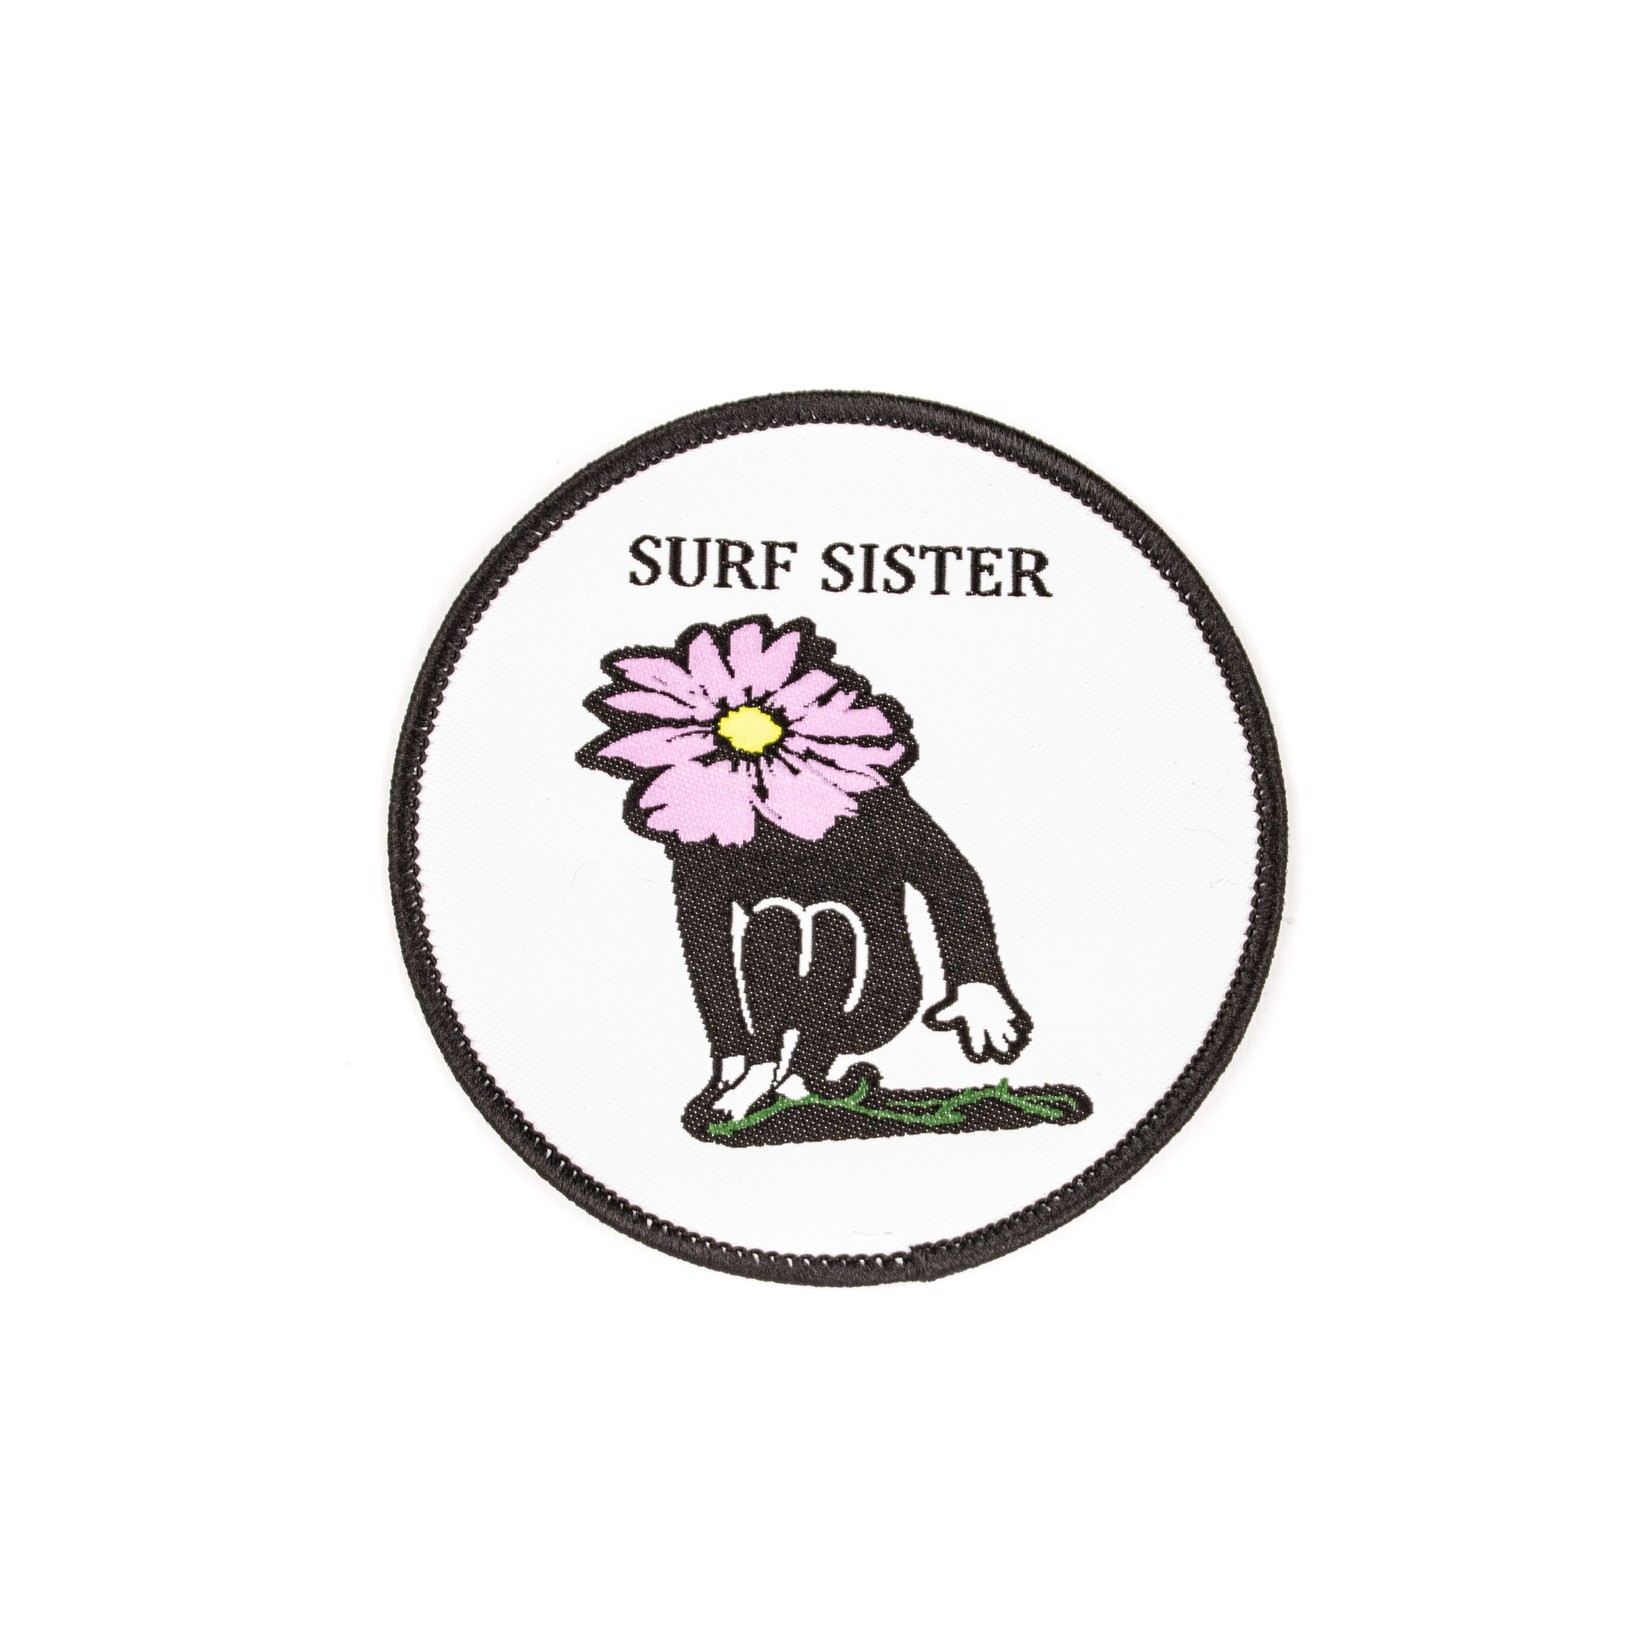 Surf Sister SURF SISTER WOVEN PATCH